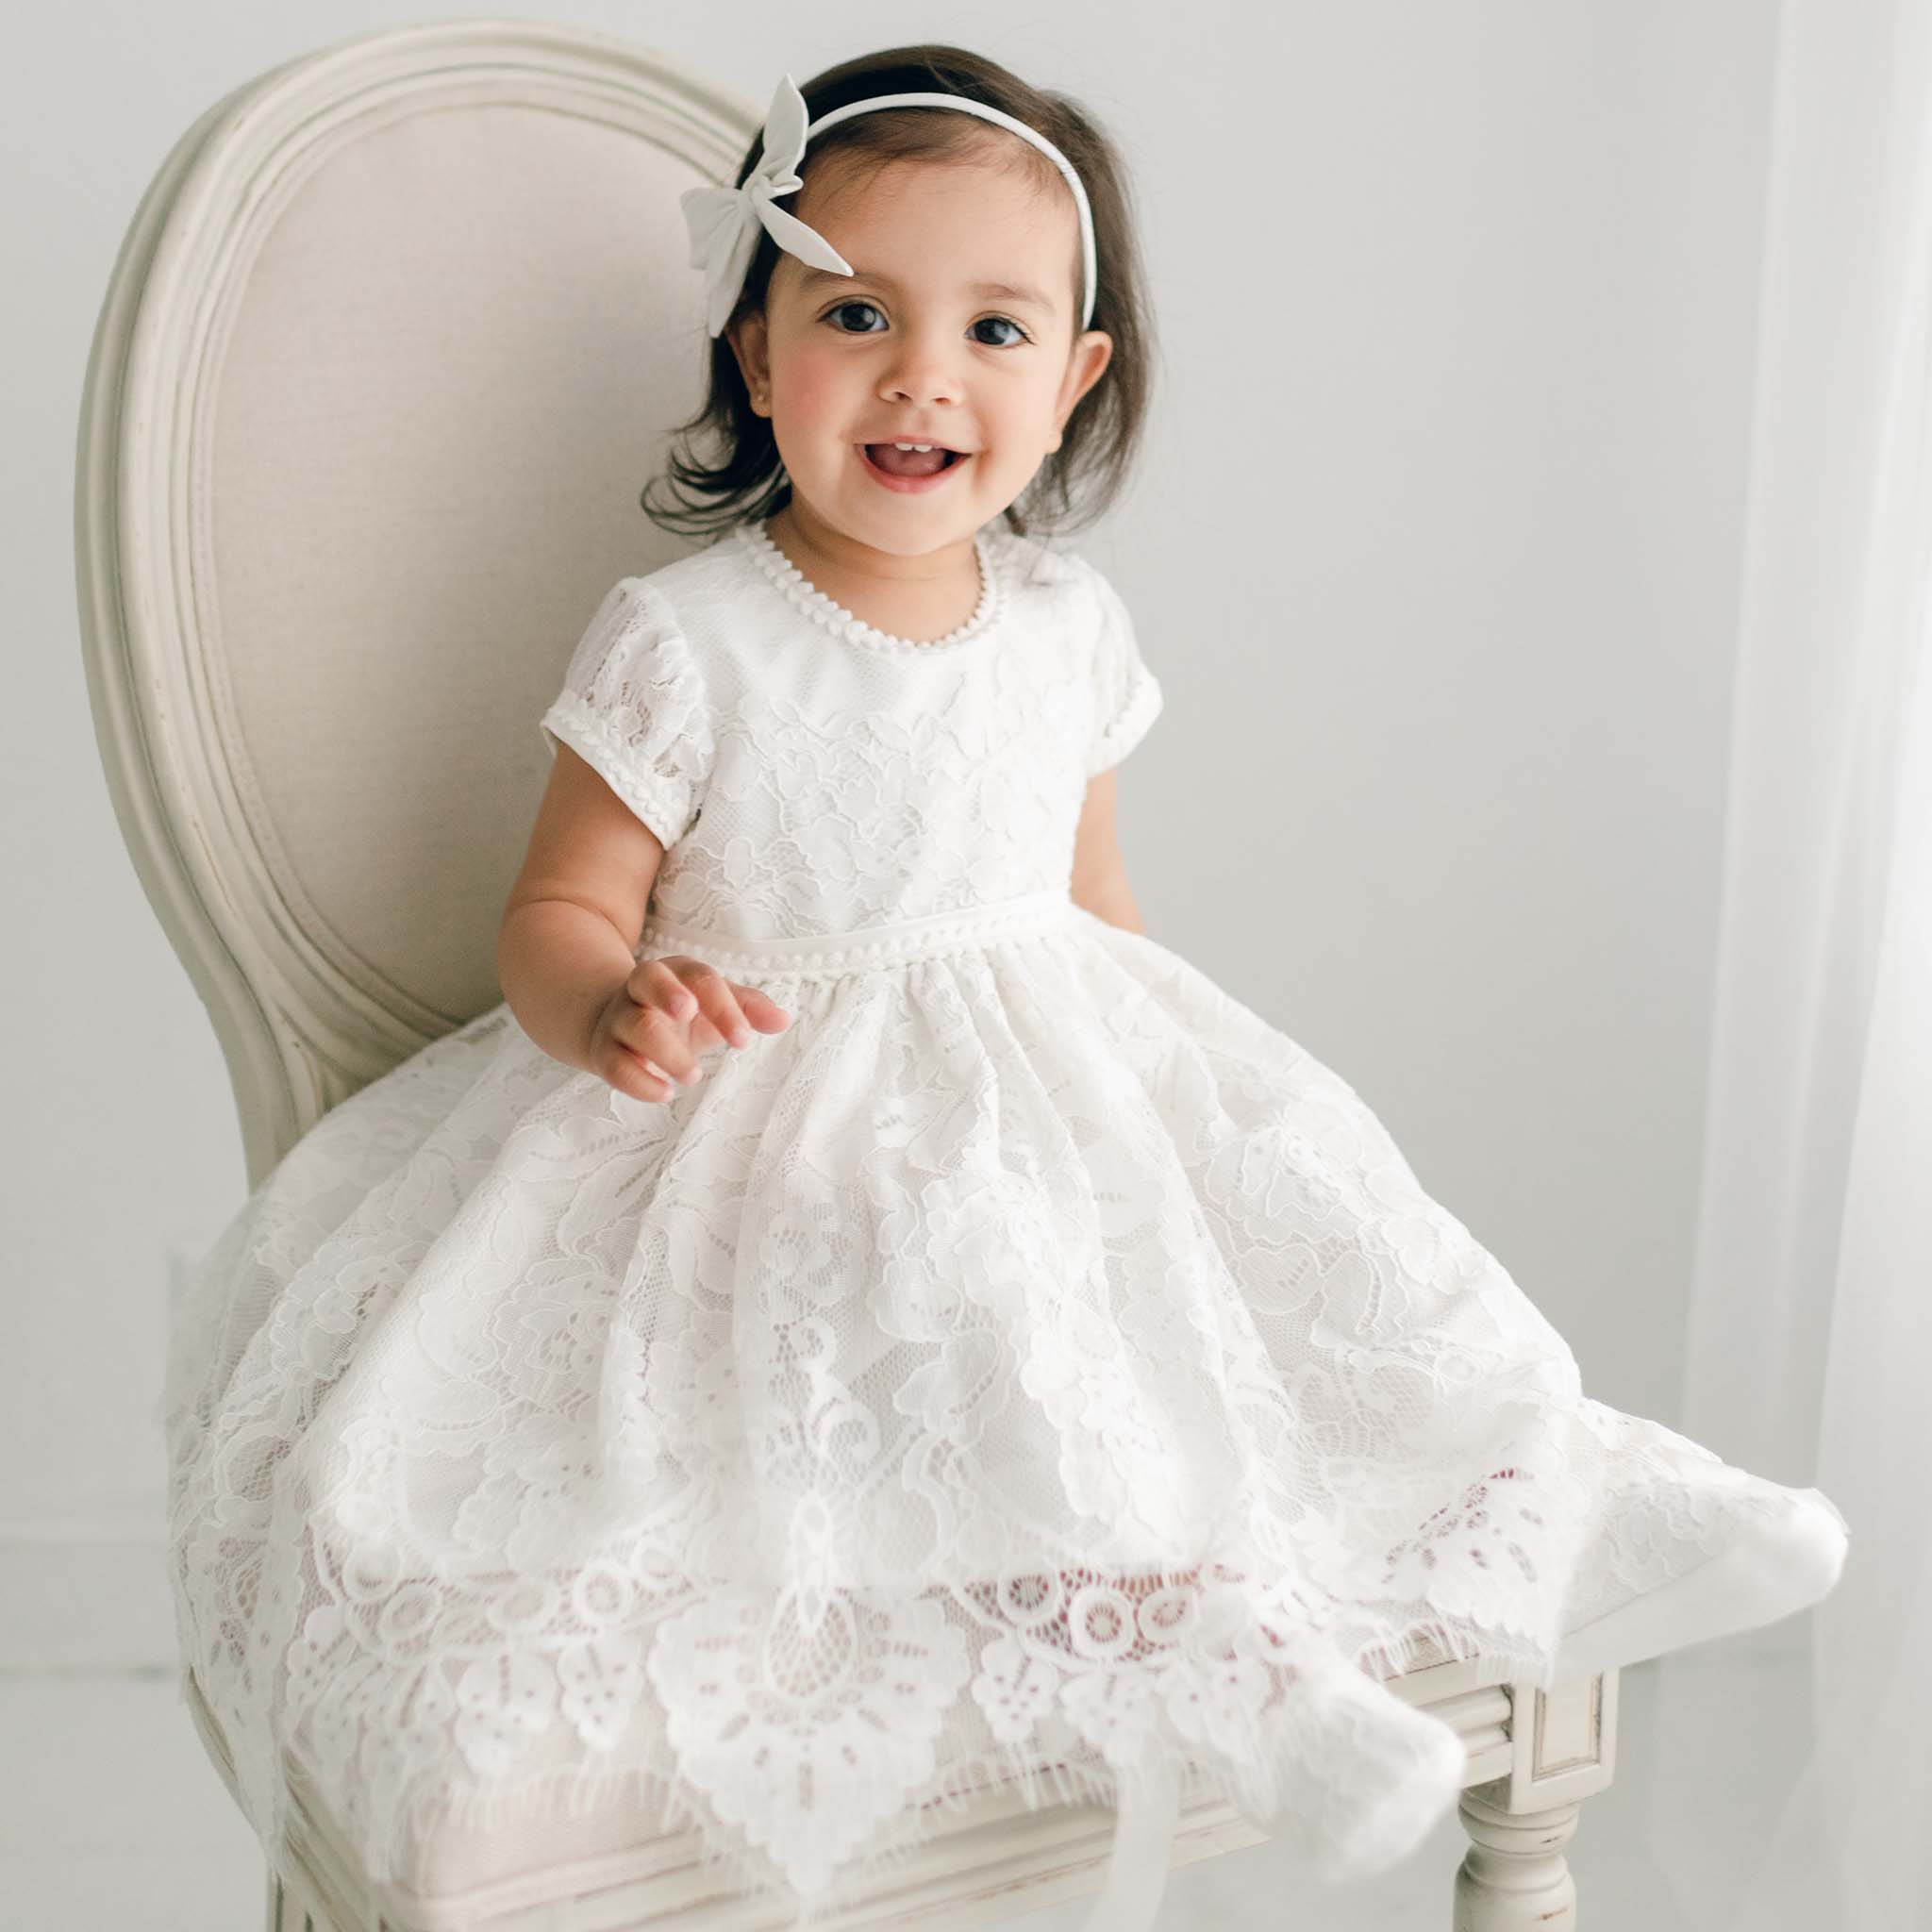 Pamina Augusta - Baby Girl Christening Dress in Size 6-18 Months/Ivory Size 6 Months / Ivory